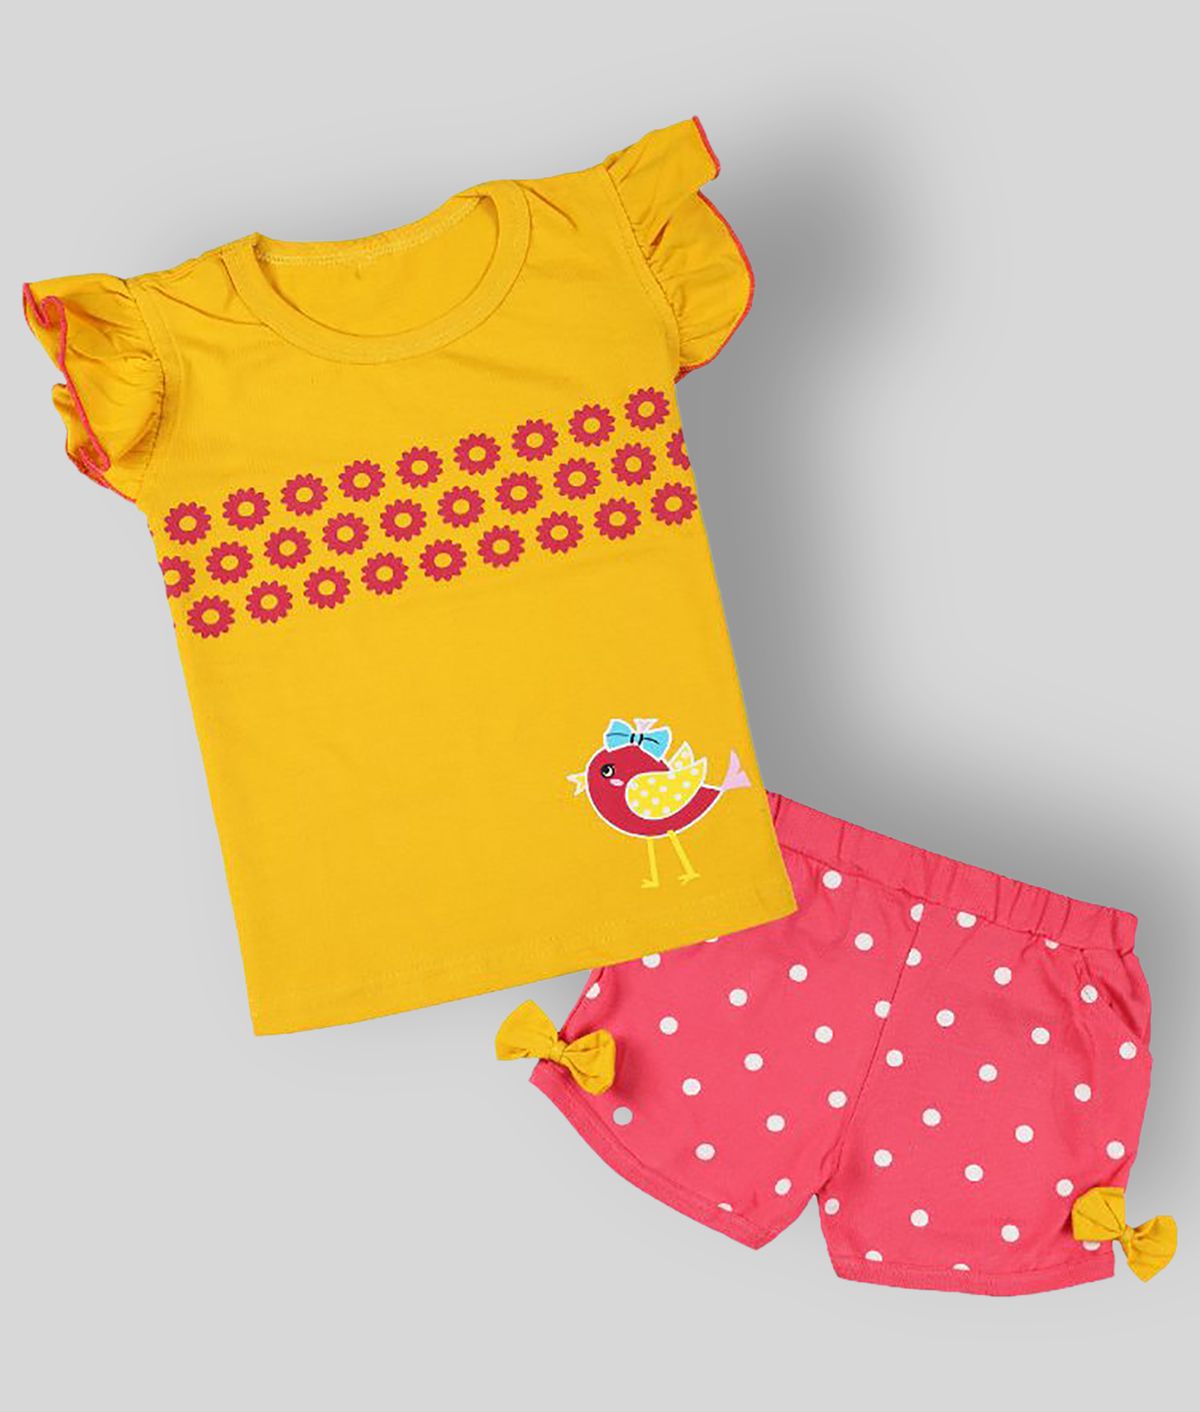     			CATCUB - Yellow Cotton Girl's Top With Shorts ( Pack of 1 )